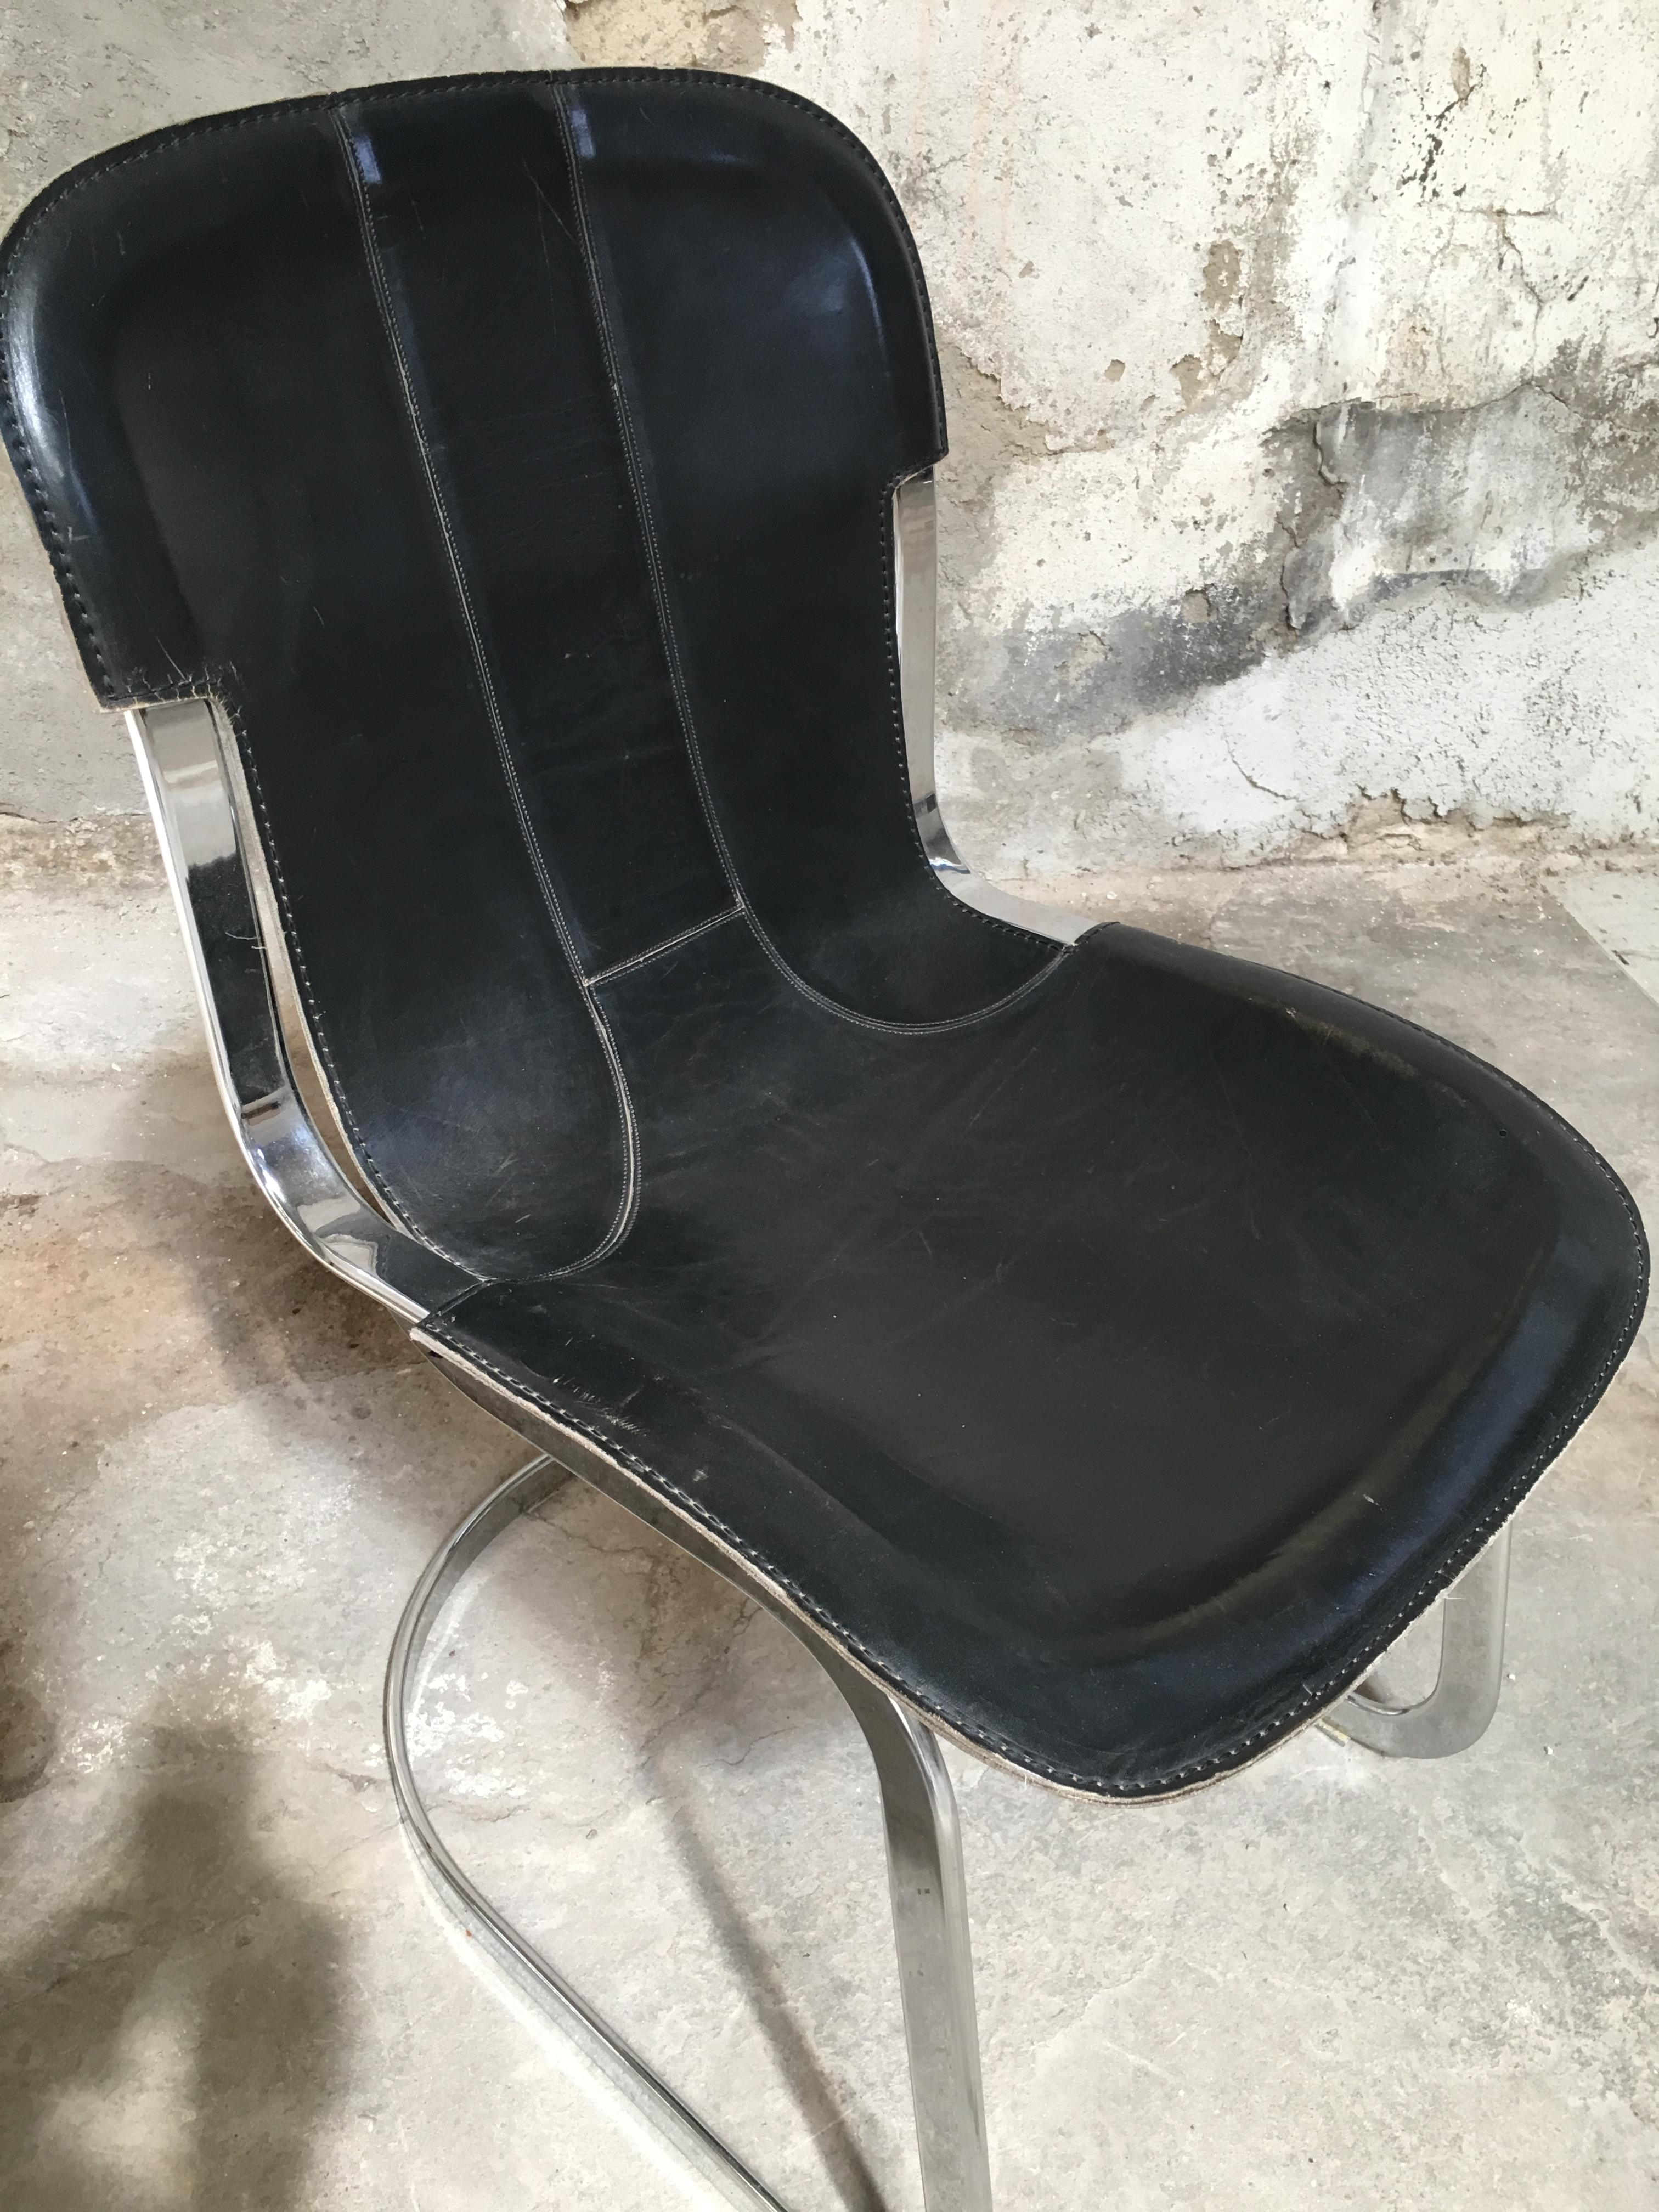 Four Italian Chairs with Original Black Leather Seat by Willy Rizzo for Cidue 4